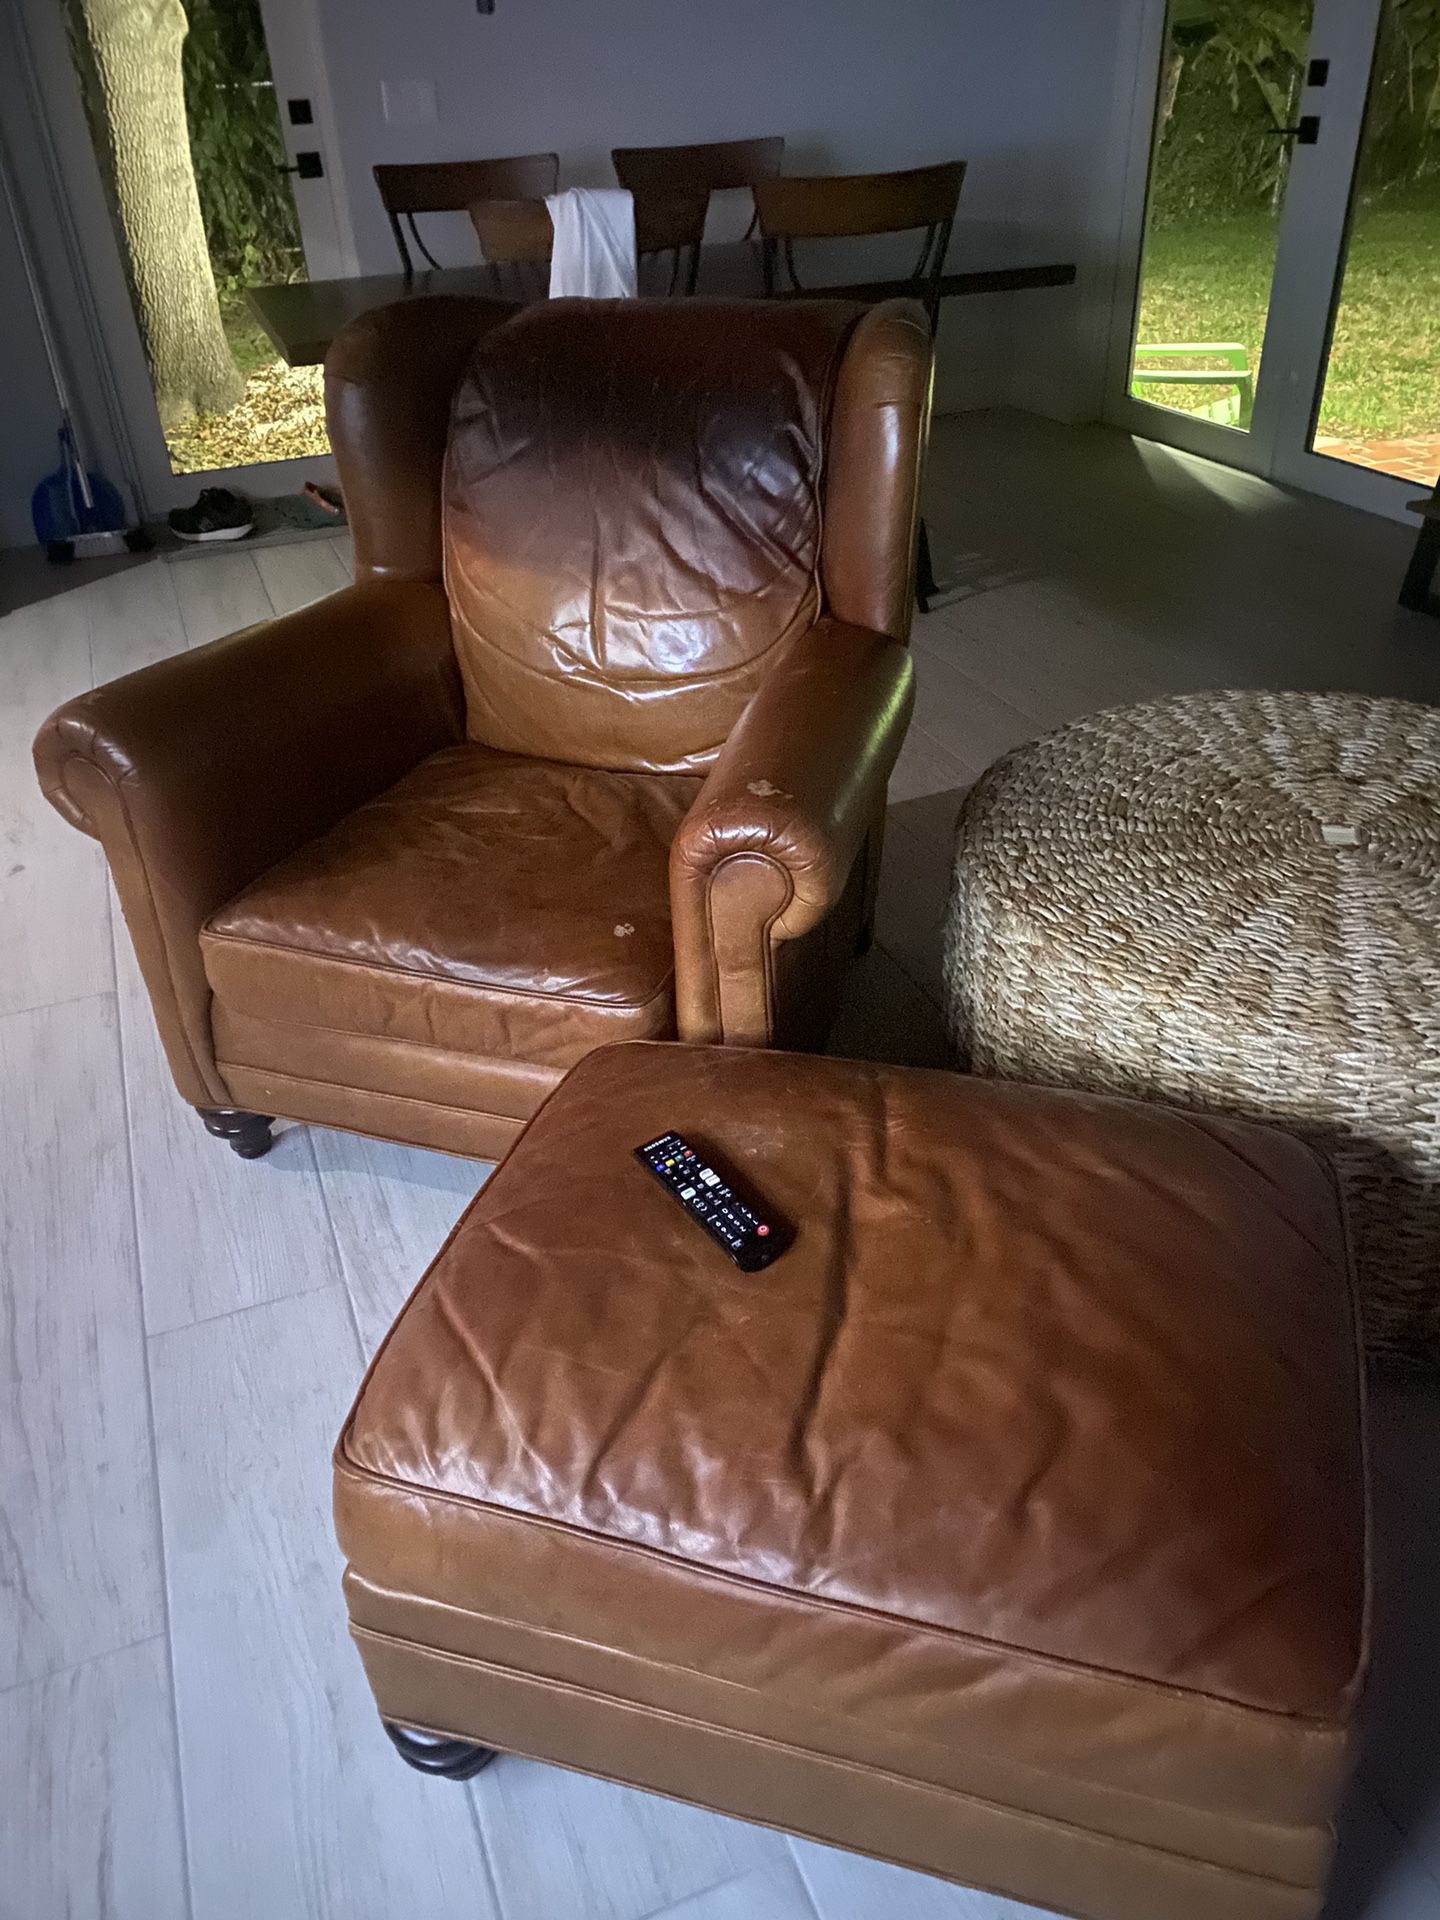 Leather Couch And Ottoman 